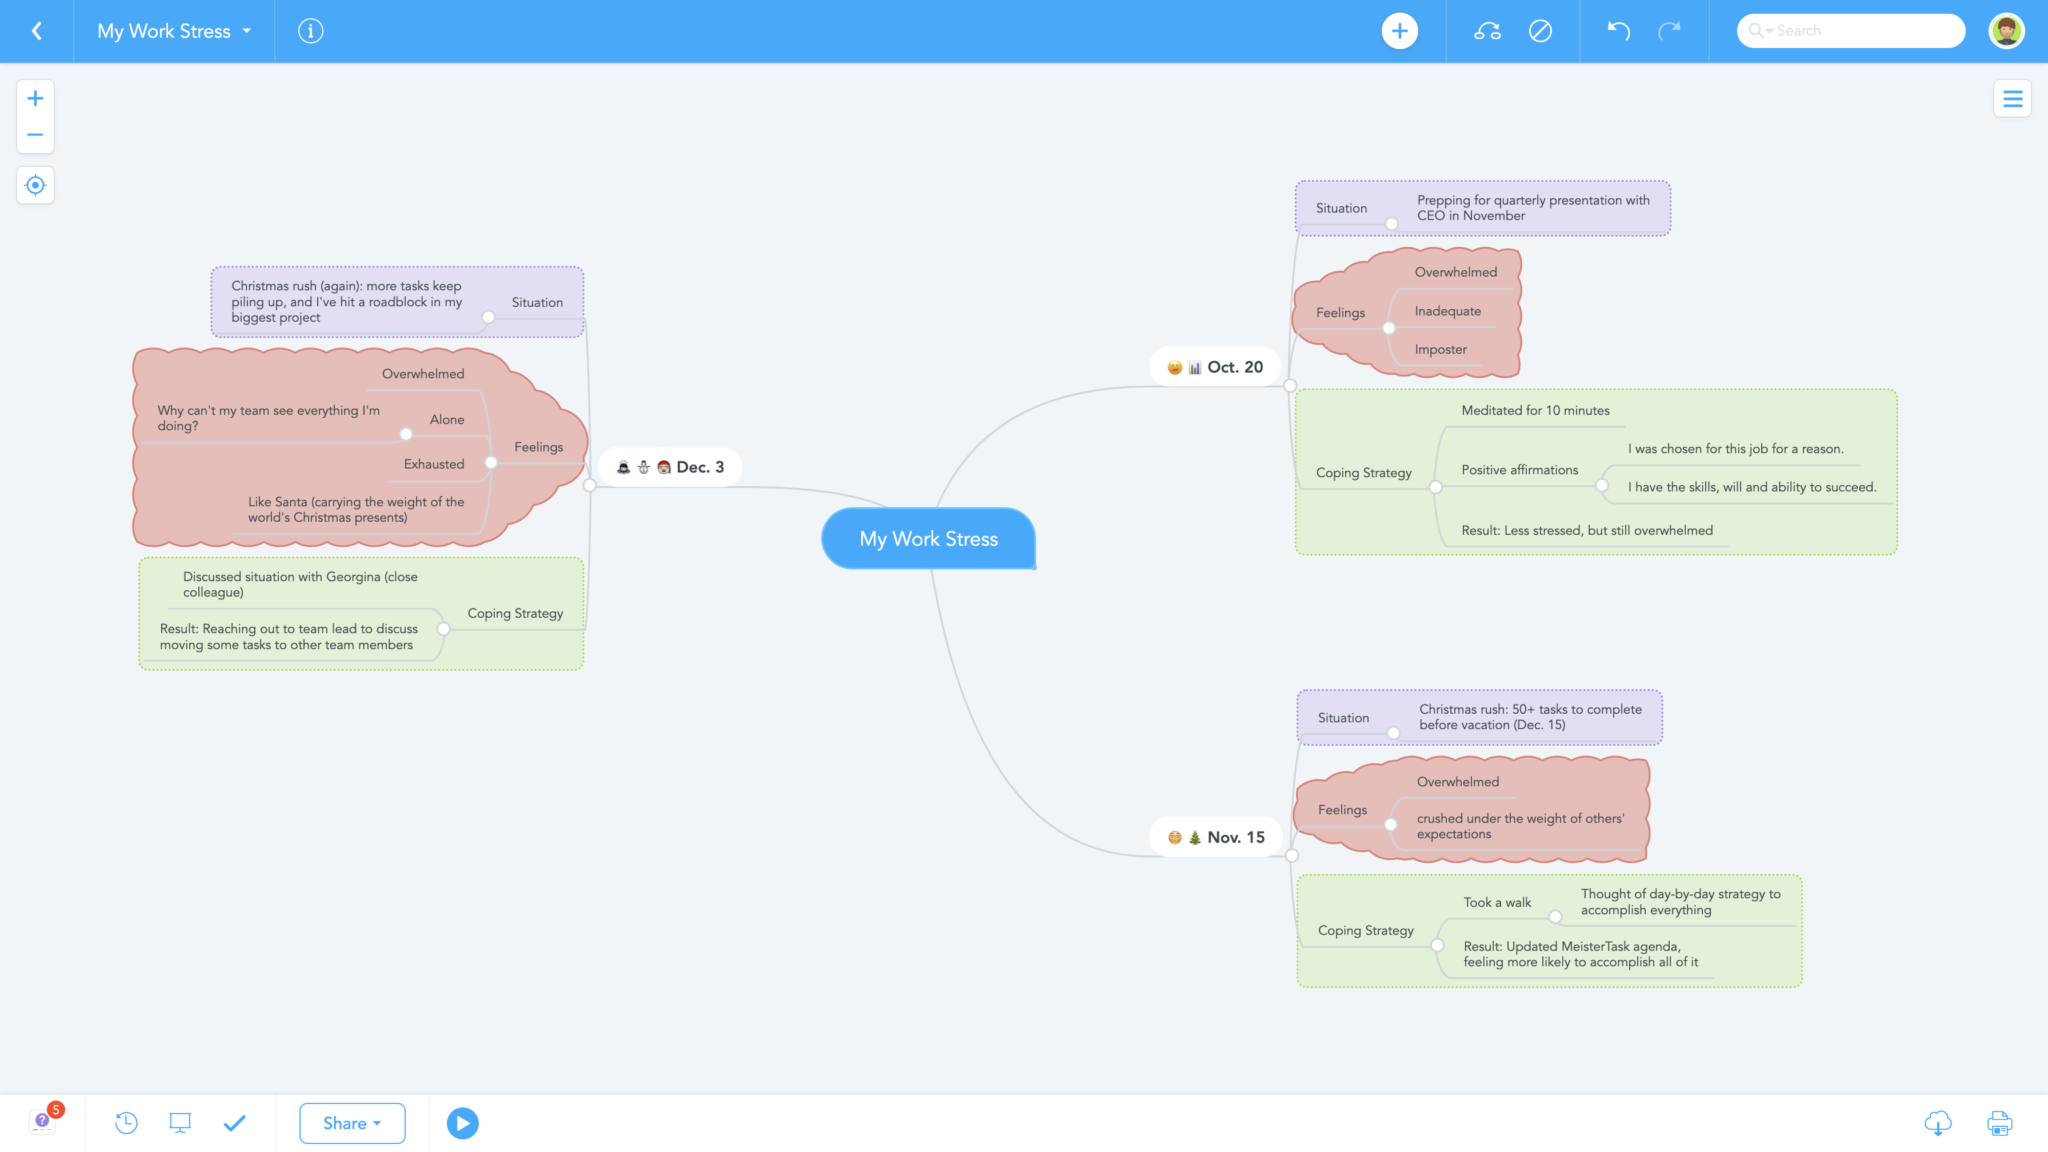 Can Mind Mapping and Task Management Tools Help Manage Work Stress?